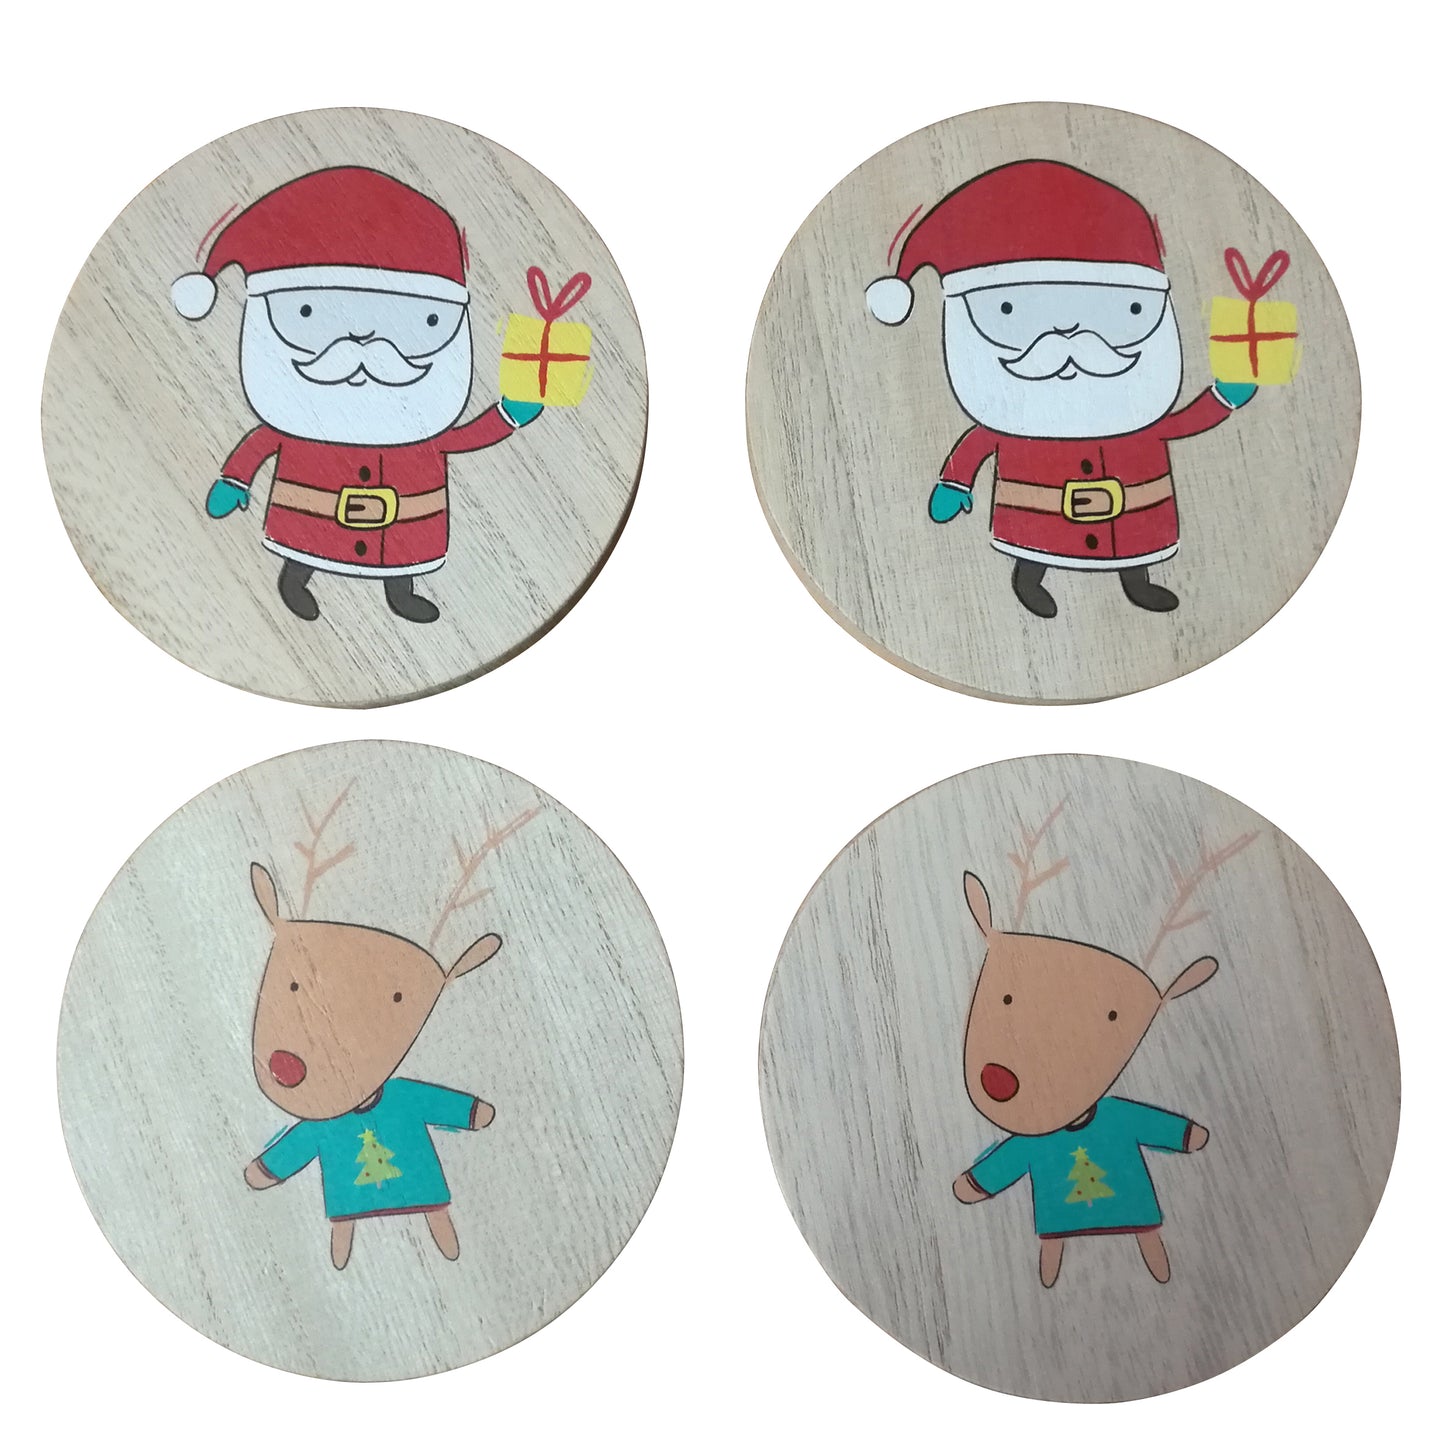 CVHOMEDECO. Santa Claus and Reindeer Wood Natural Bark Coaster Set, 2xSanta Claus Coasters+2xReindeer Coasters Tied Off with a Rubber Band, 4 Inch, Set of 4.